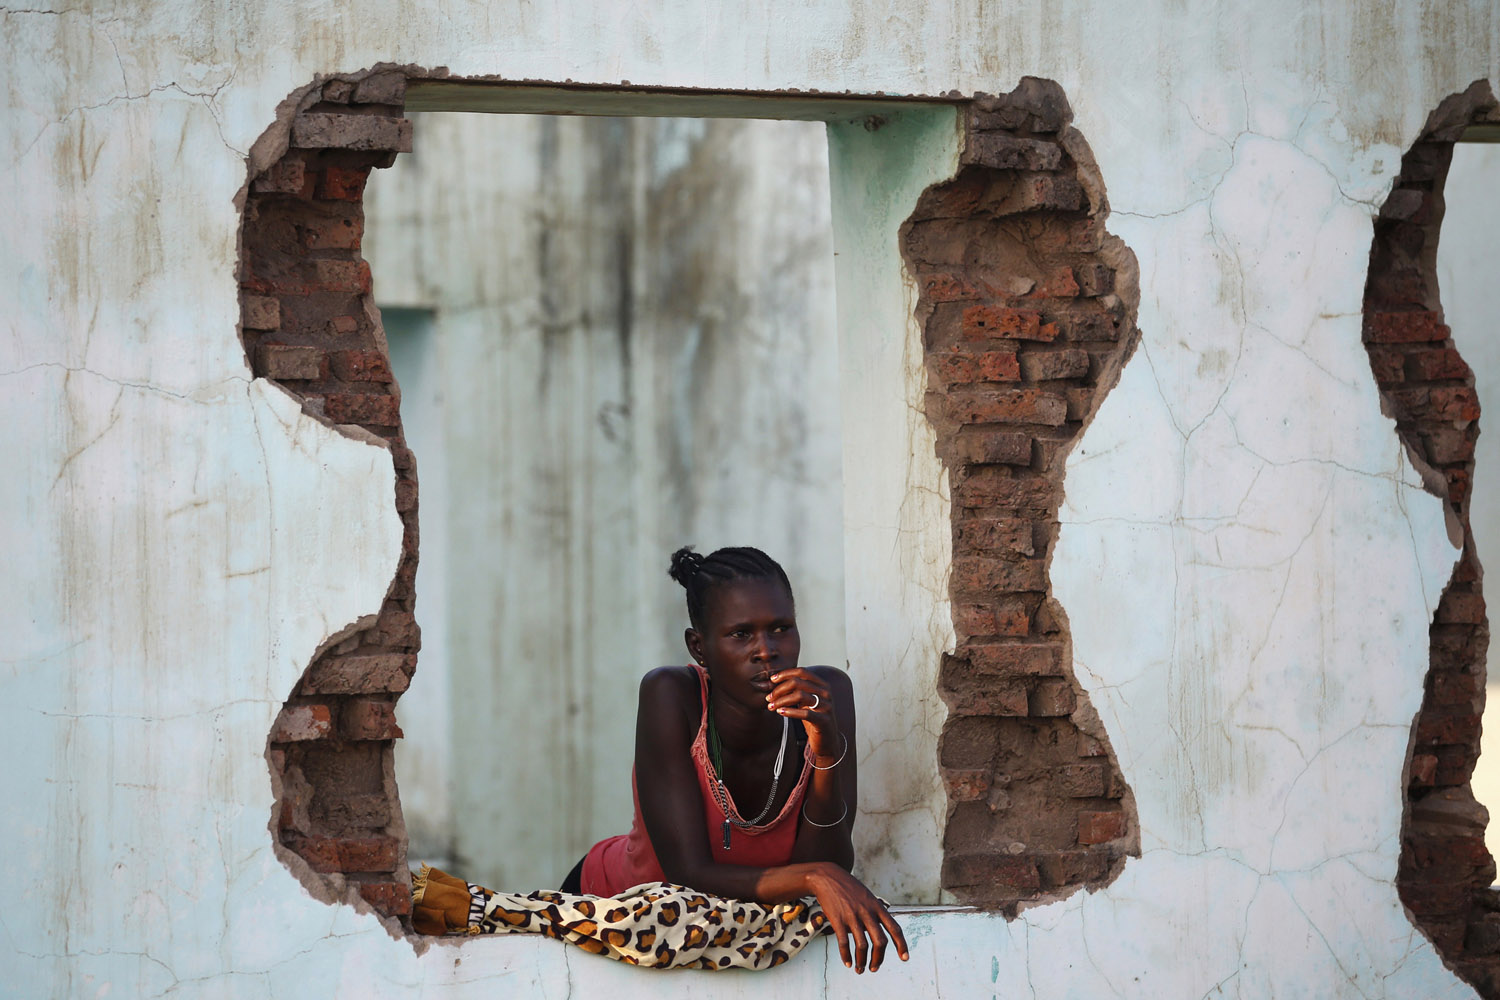 Oct. 26, 2013. A woman looks out of an abandoned building near polling stations in the town of Abyei, ahead of the referendum on whether to join Sudan or South Sudan.